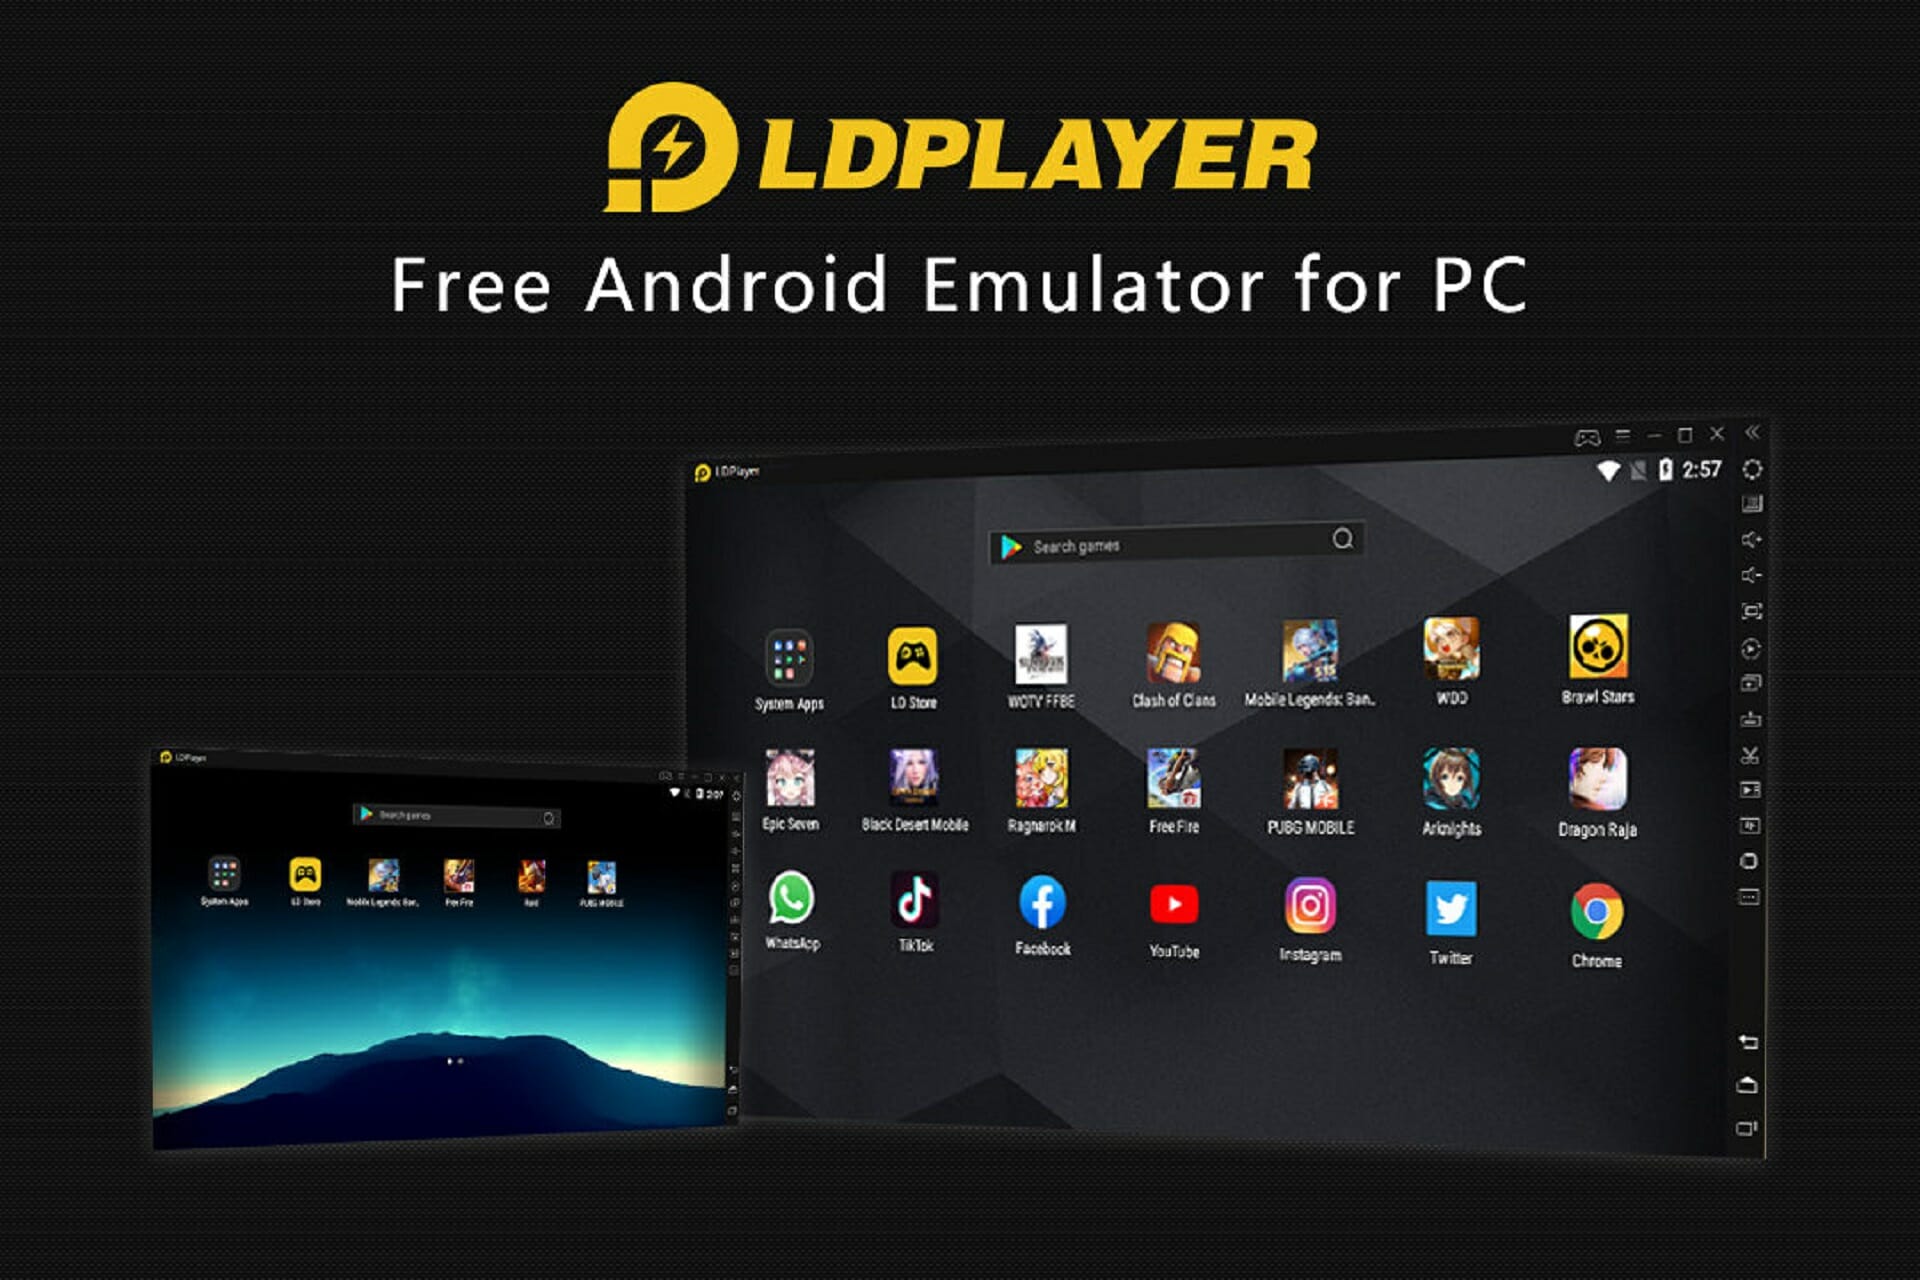 Download 2 Player Offline Games - Two on PC (Emulator) - LDPlayer